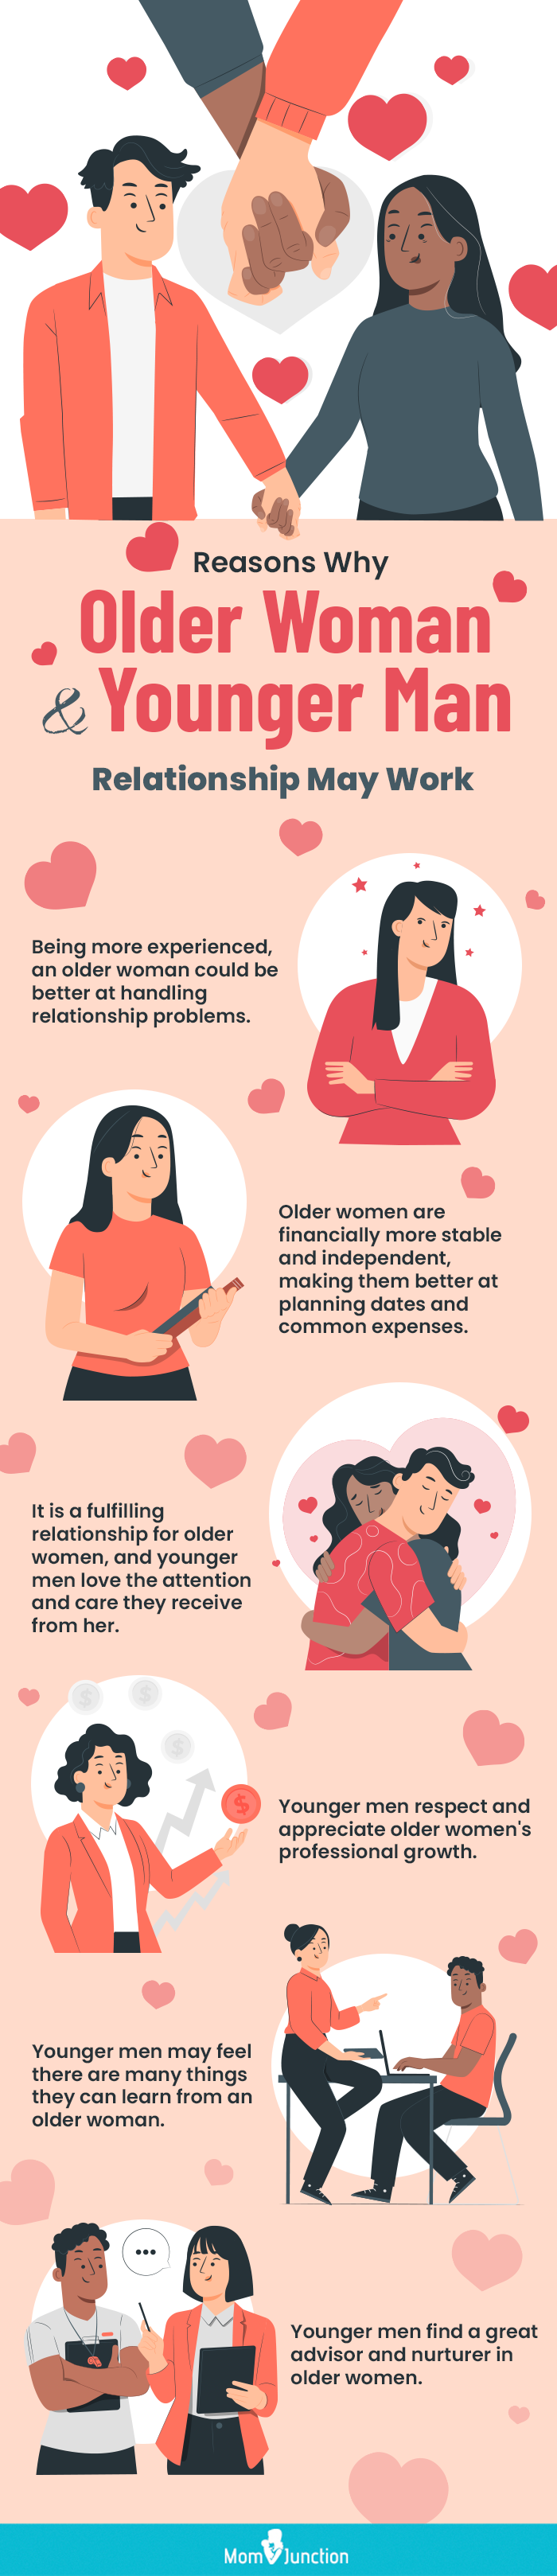 why this relationship might work [infographic]